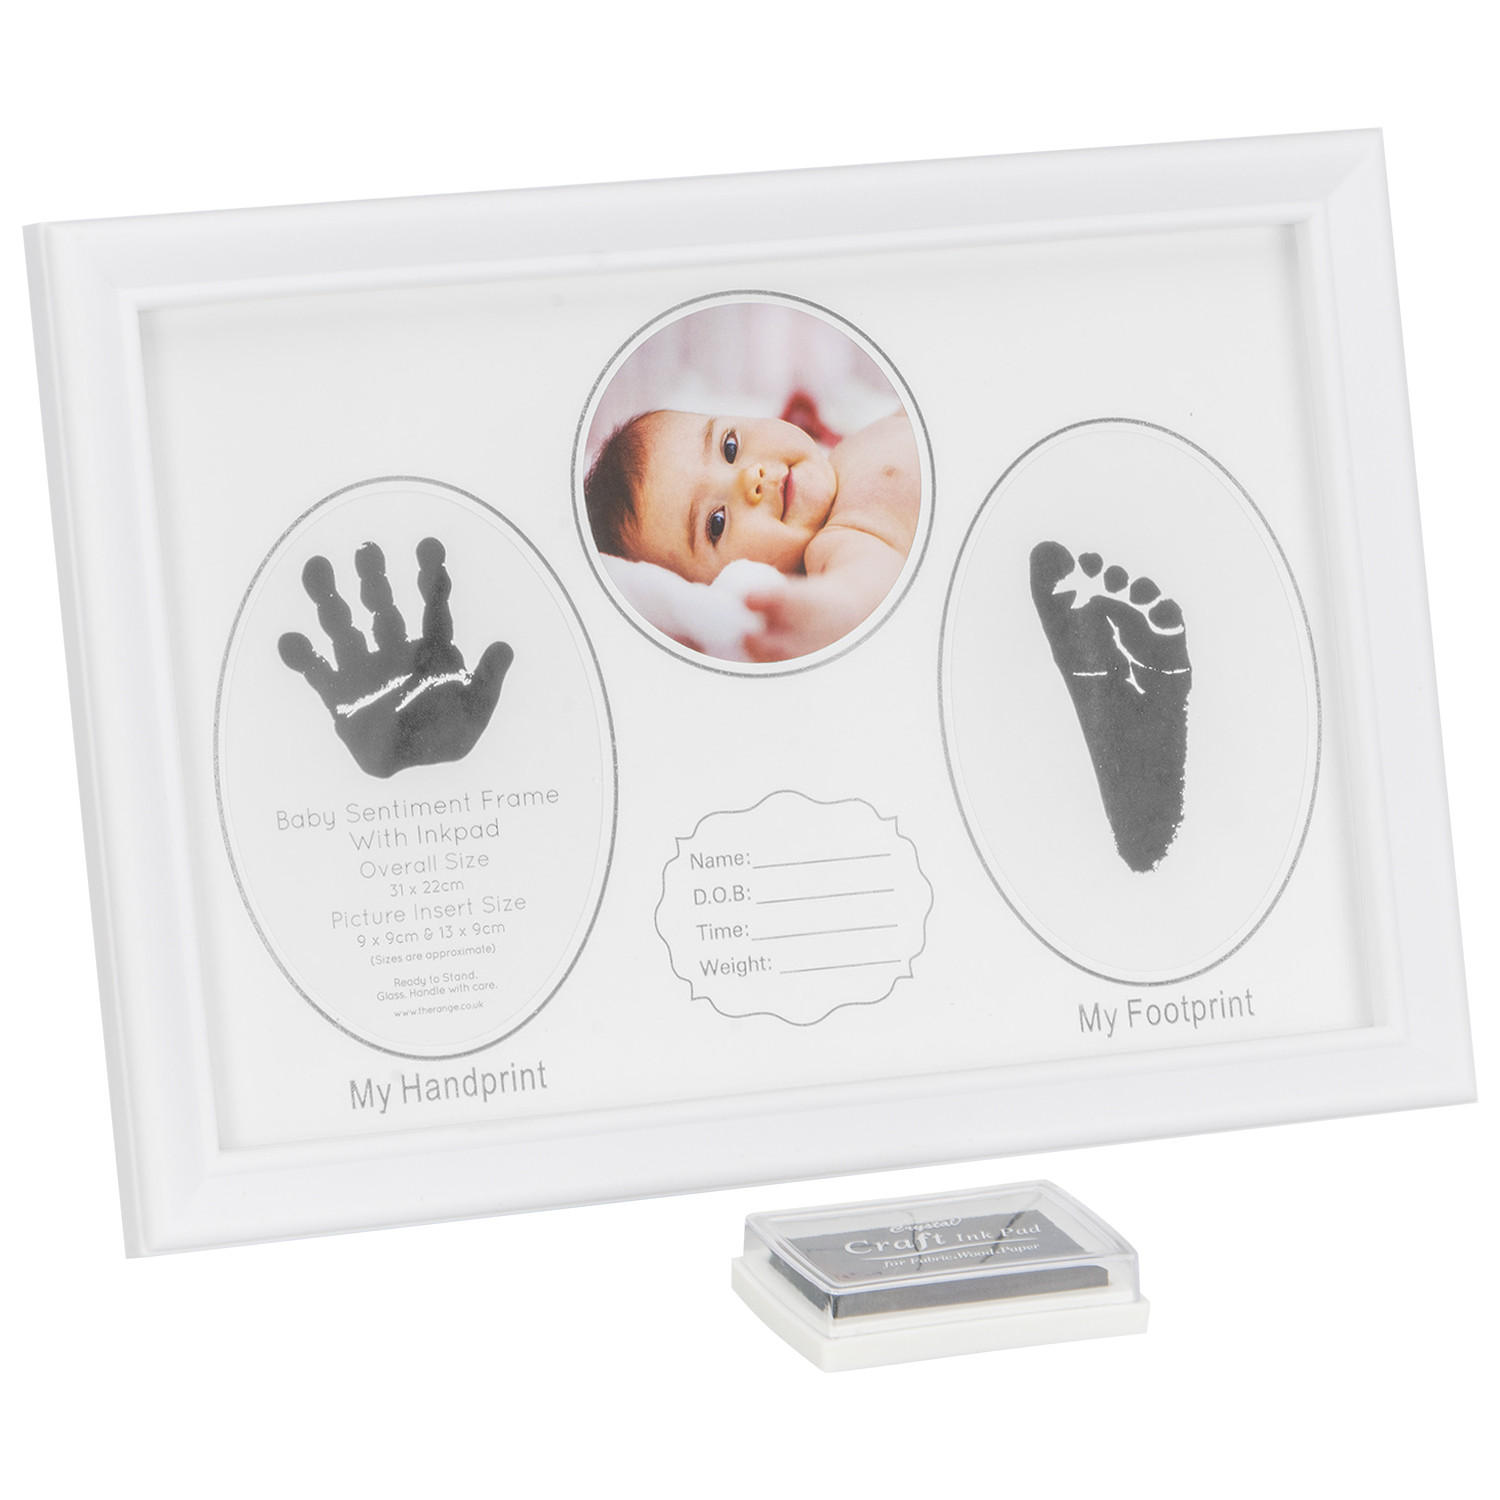 Baby Sentiment White Photo Frame with Inkpad 21 x 31cm Image 1